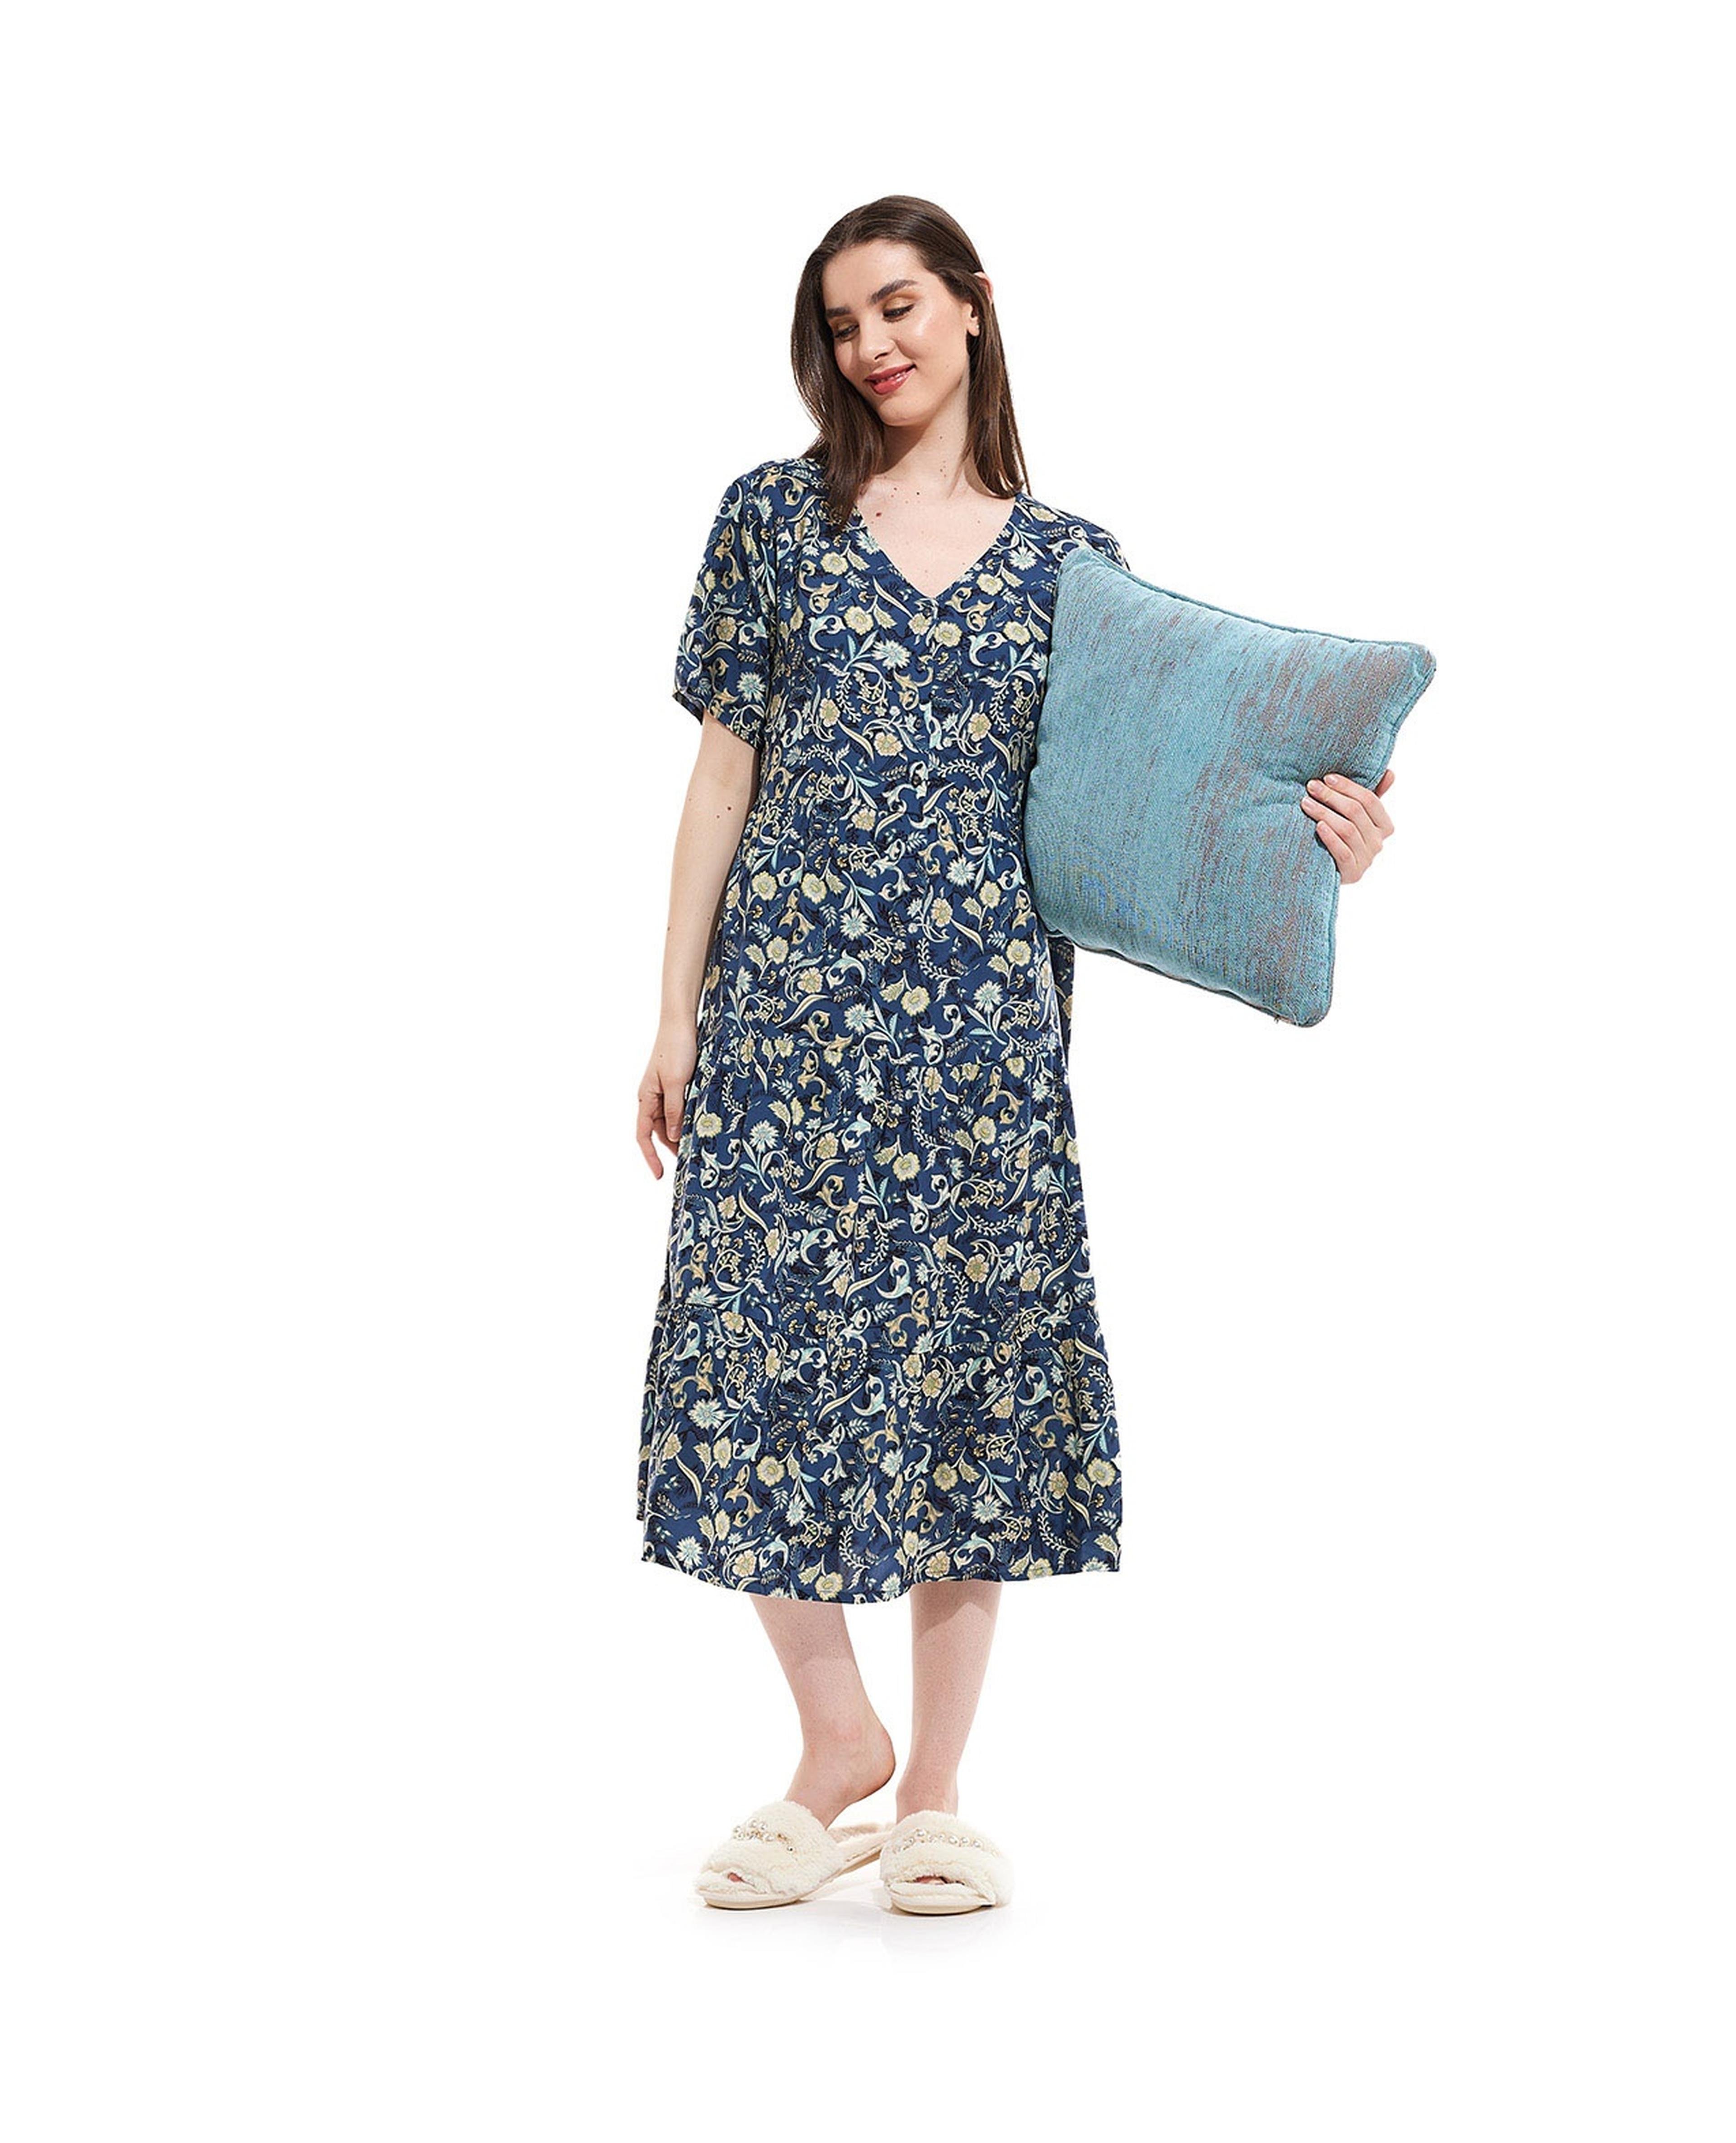 Patterned Nightdress with V-Neck and Short Sleeves